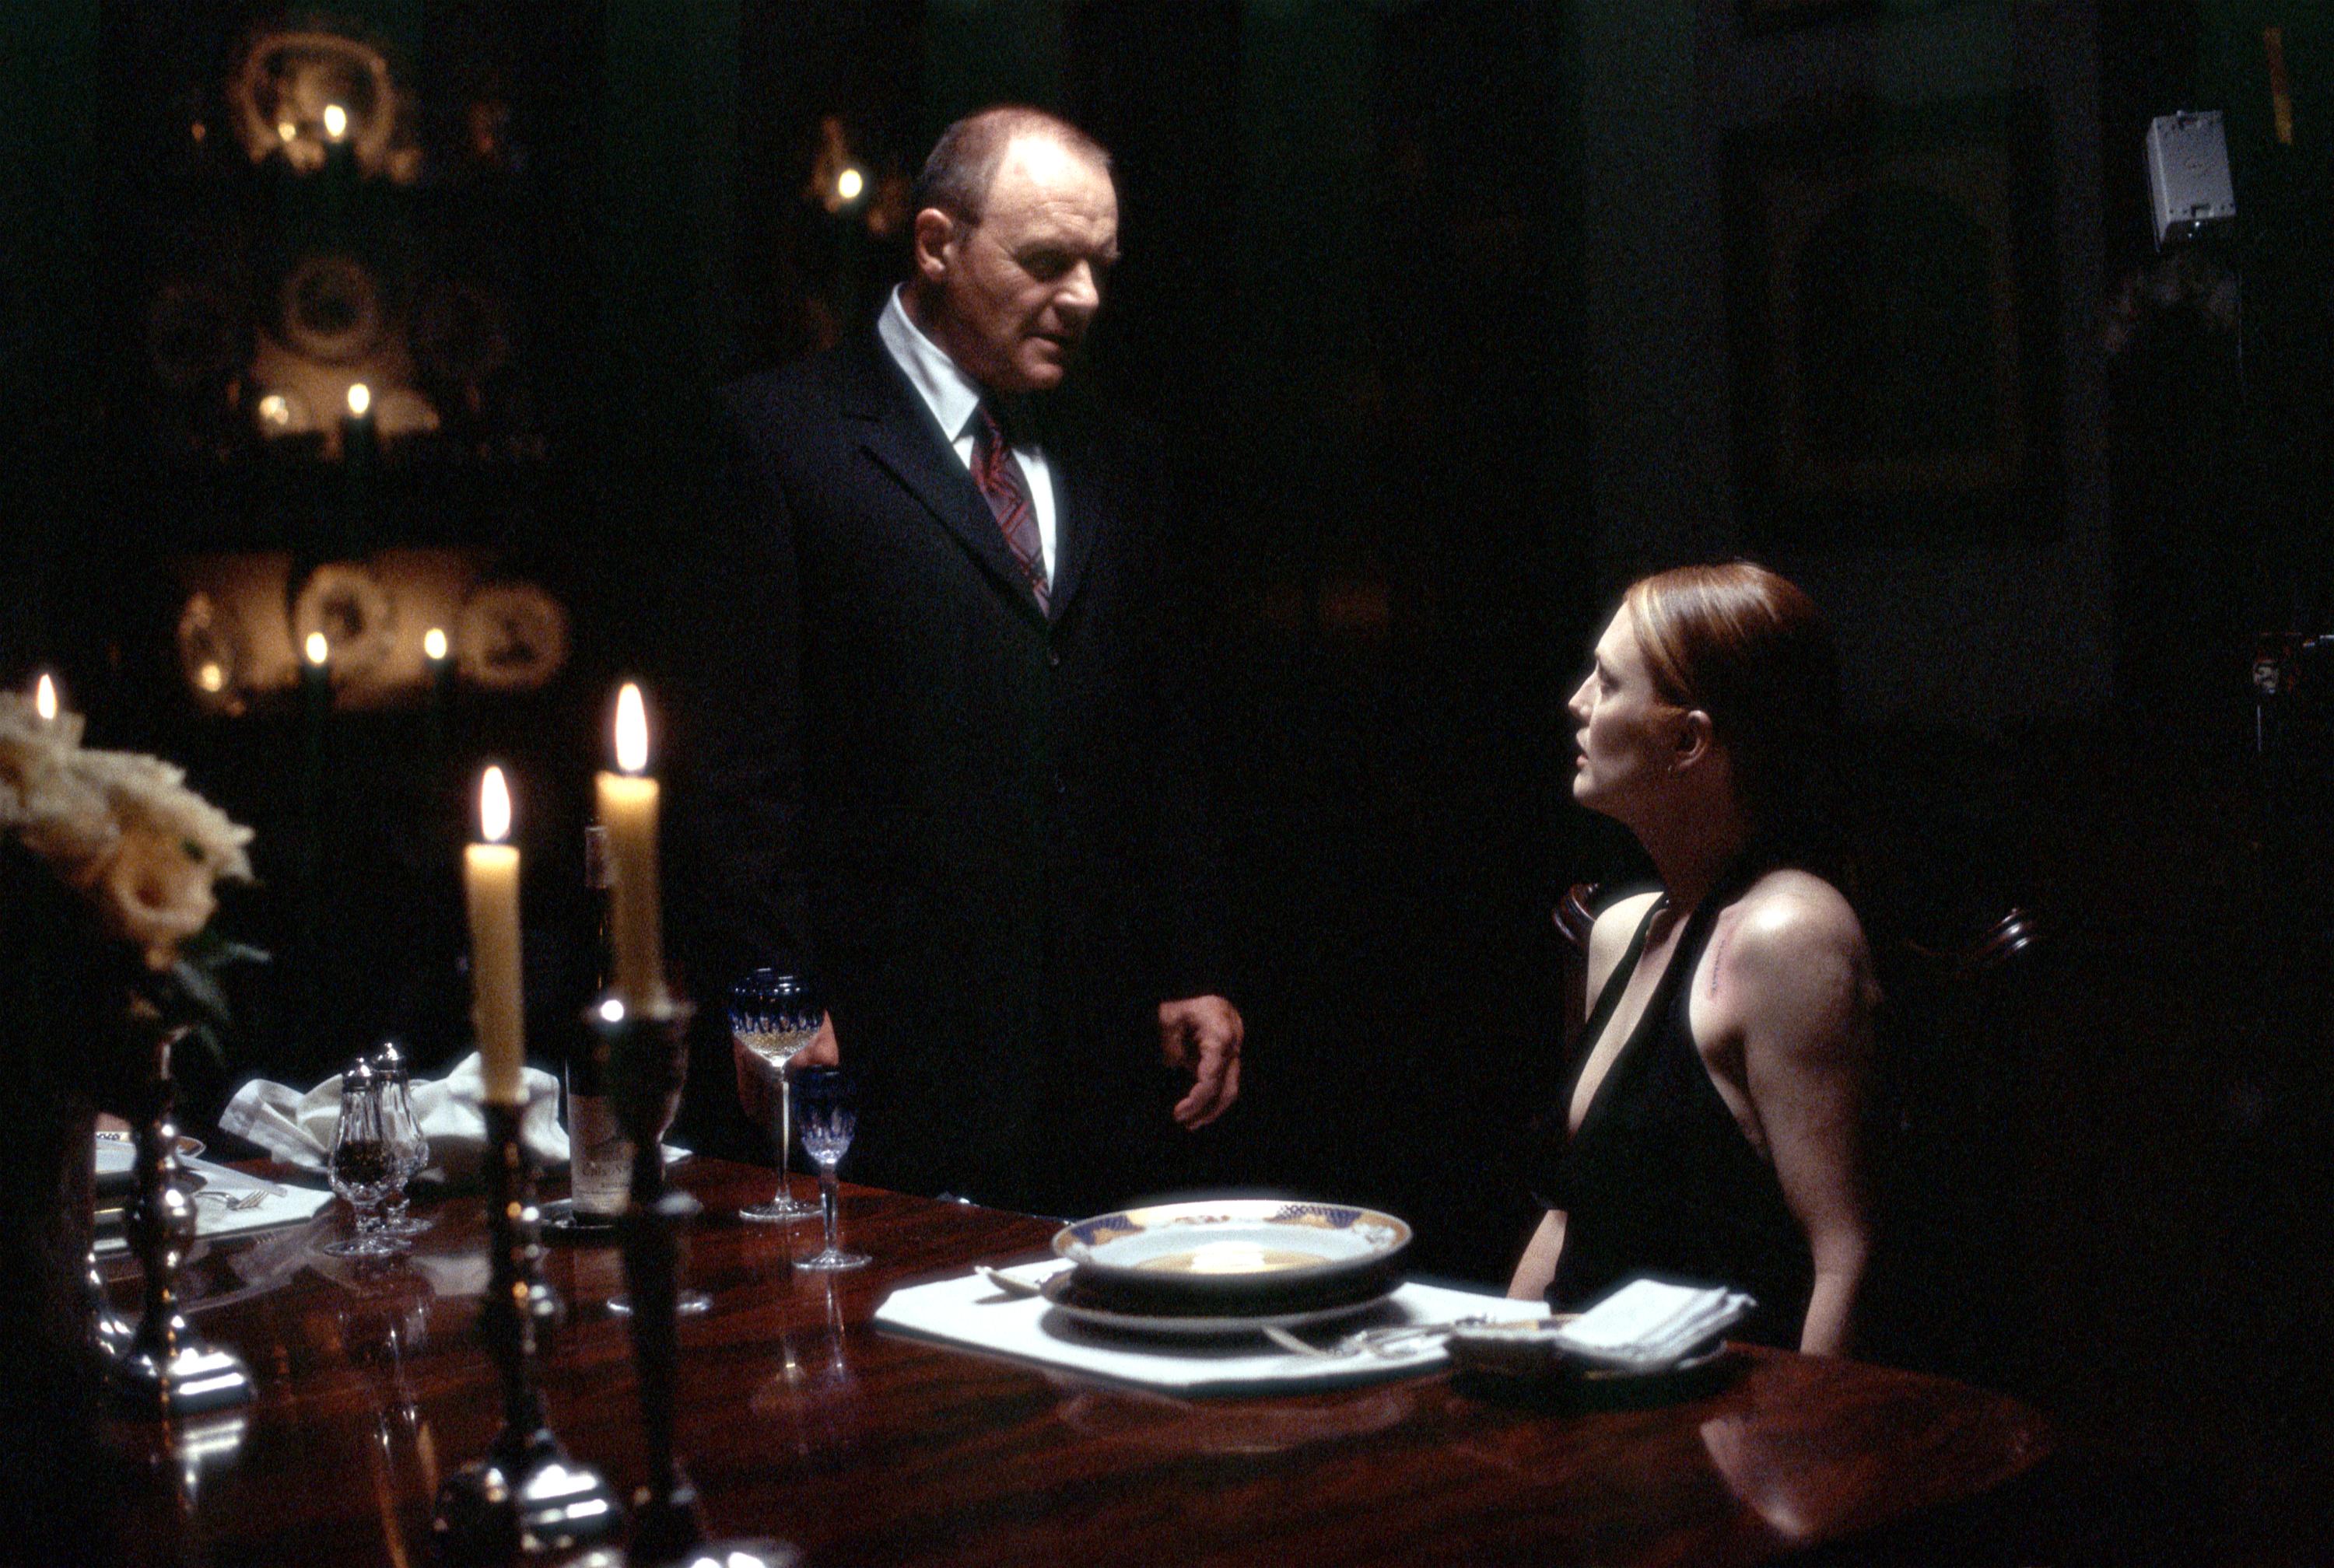 Anthony Hopkins stars as Dr. Hannibal Lecter and Julianne Moore stars as FBI Agent Clarice Starling in 'Hannibal' |